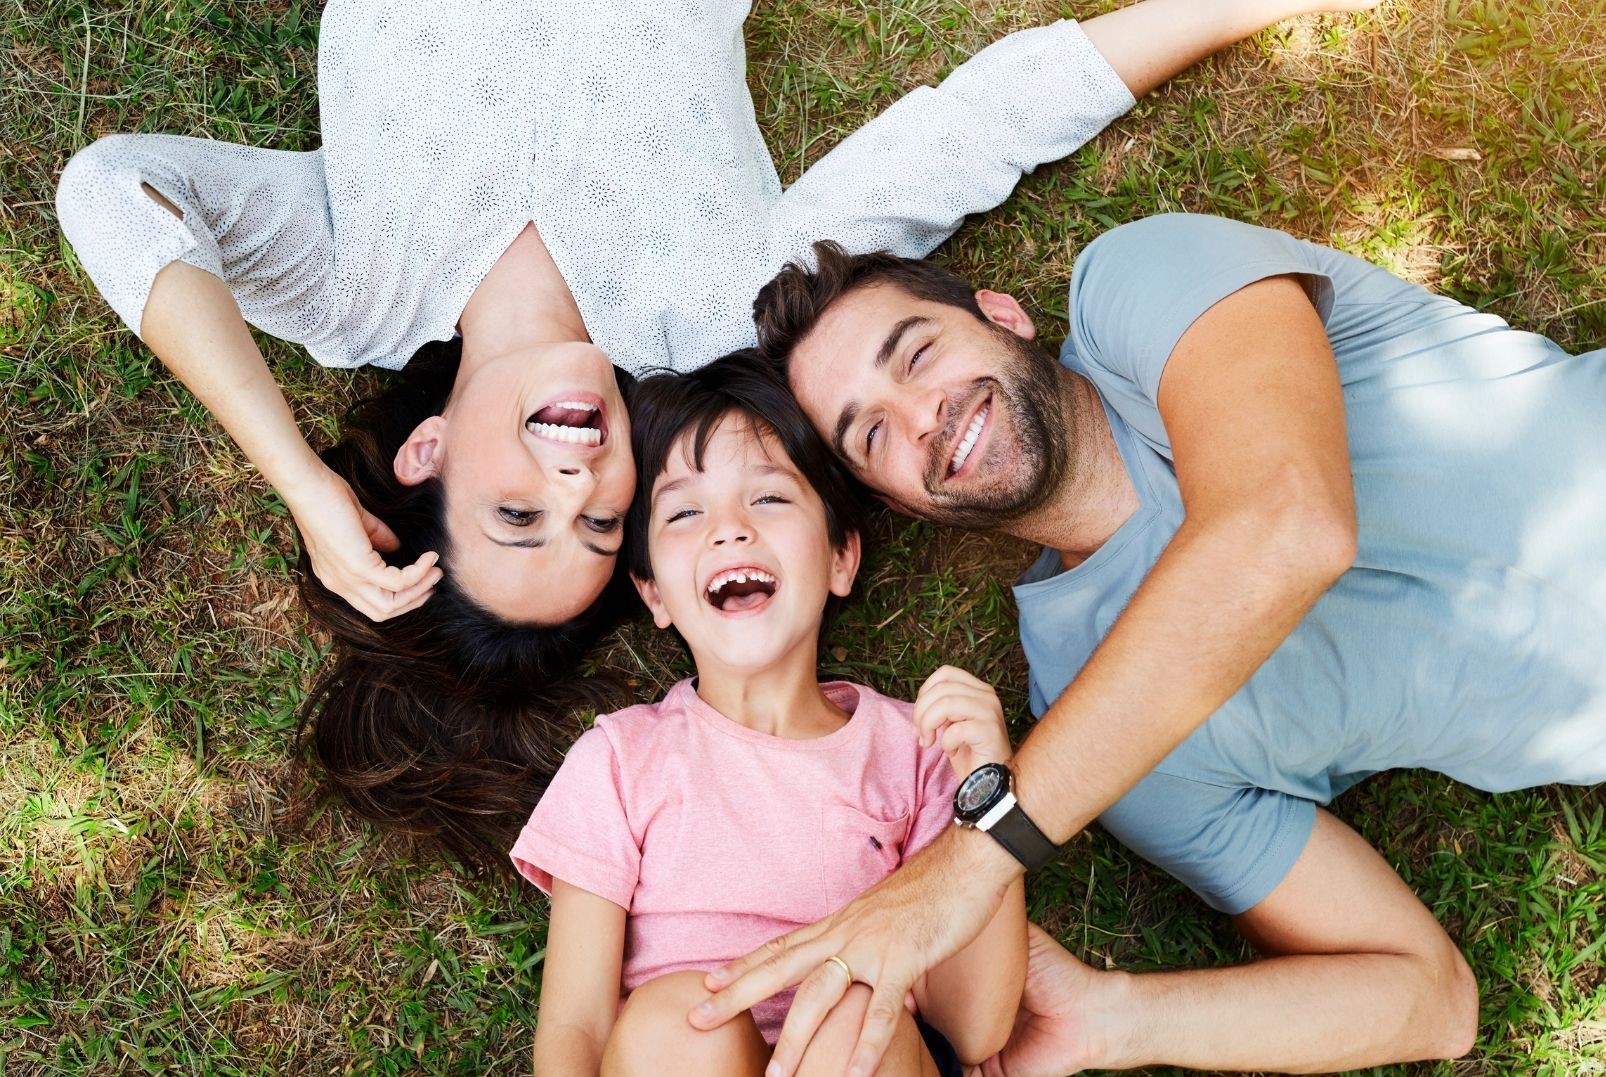 Mom, dad and a kid smiling on a grass field